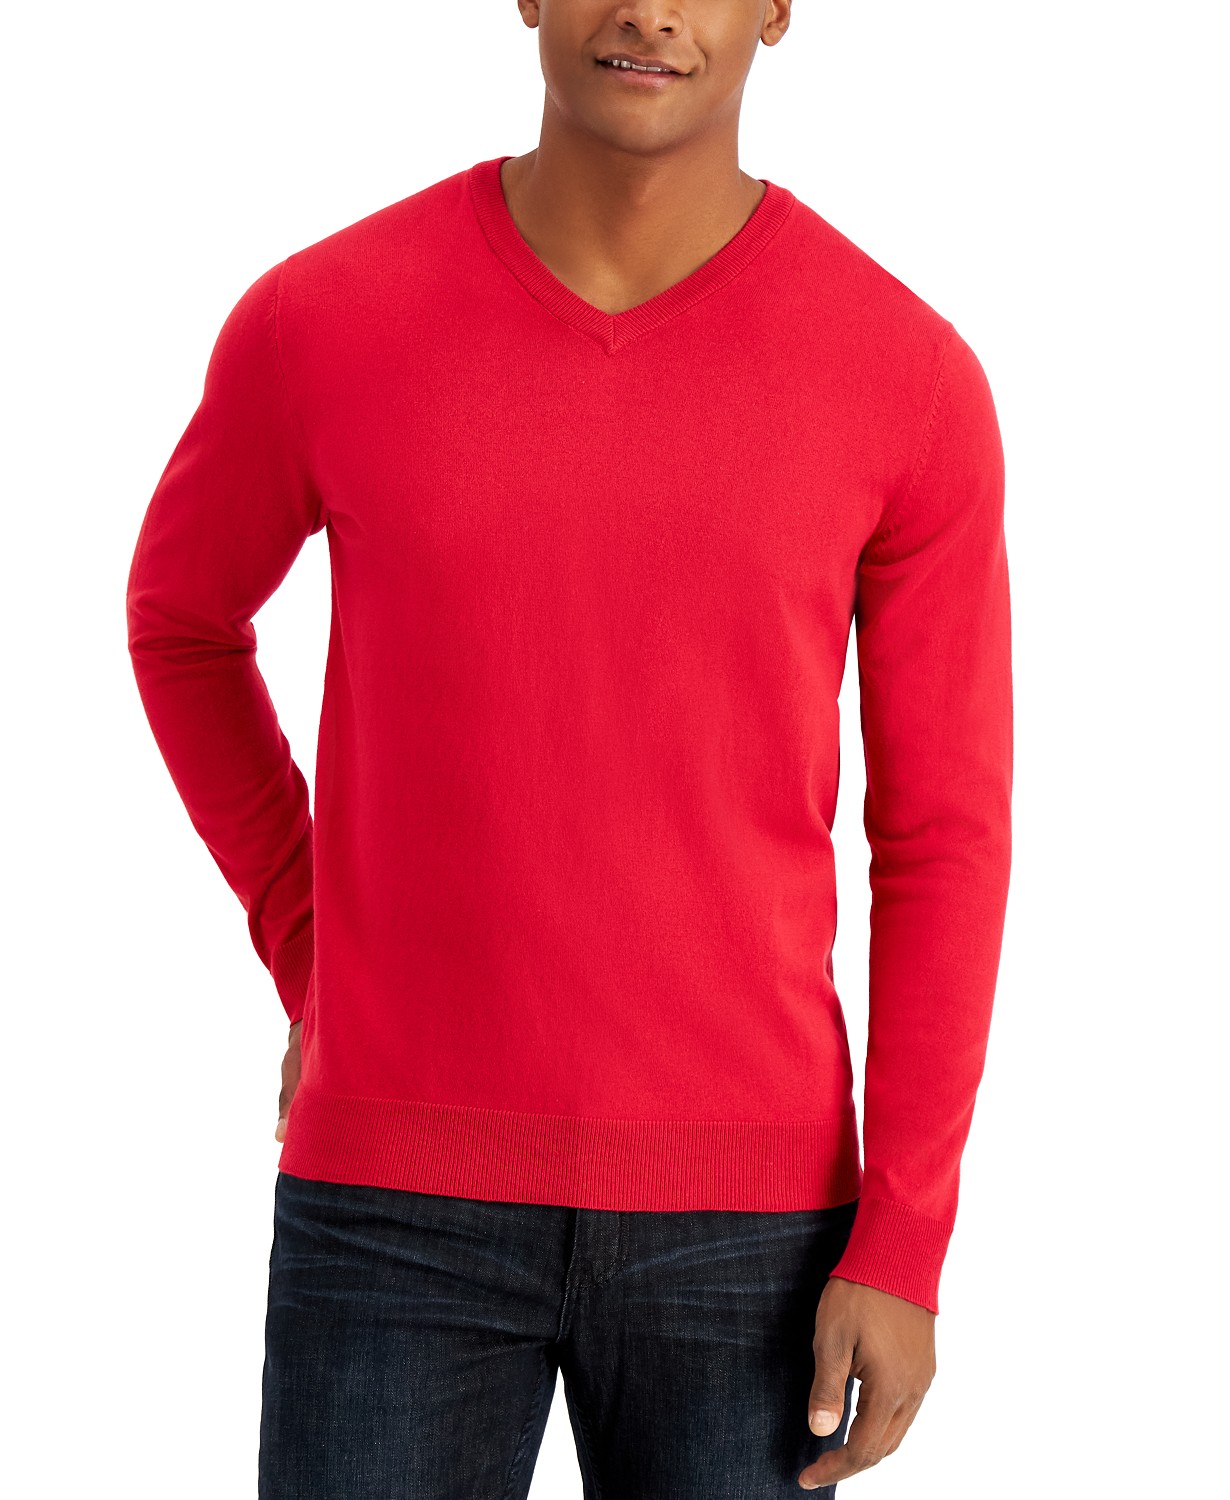 www.couturepoint.com-alfani-mens-red-solid-v-neck-long-sleeves-sweater